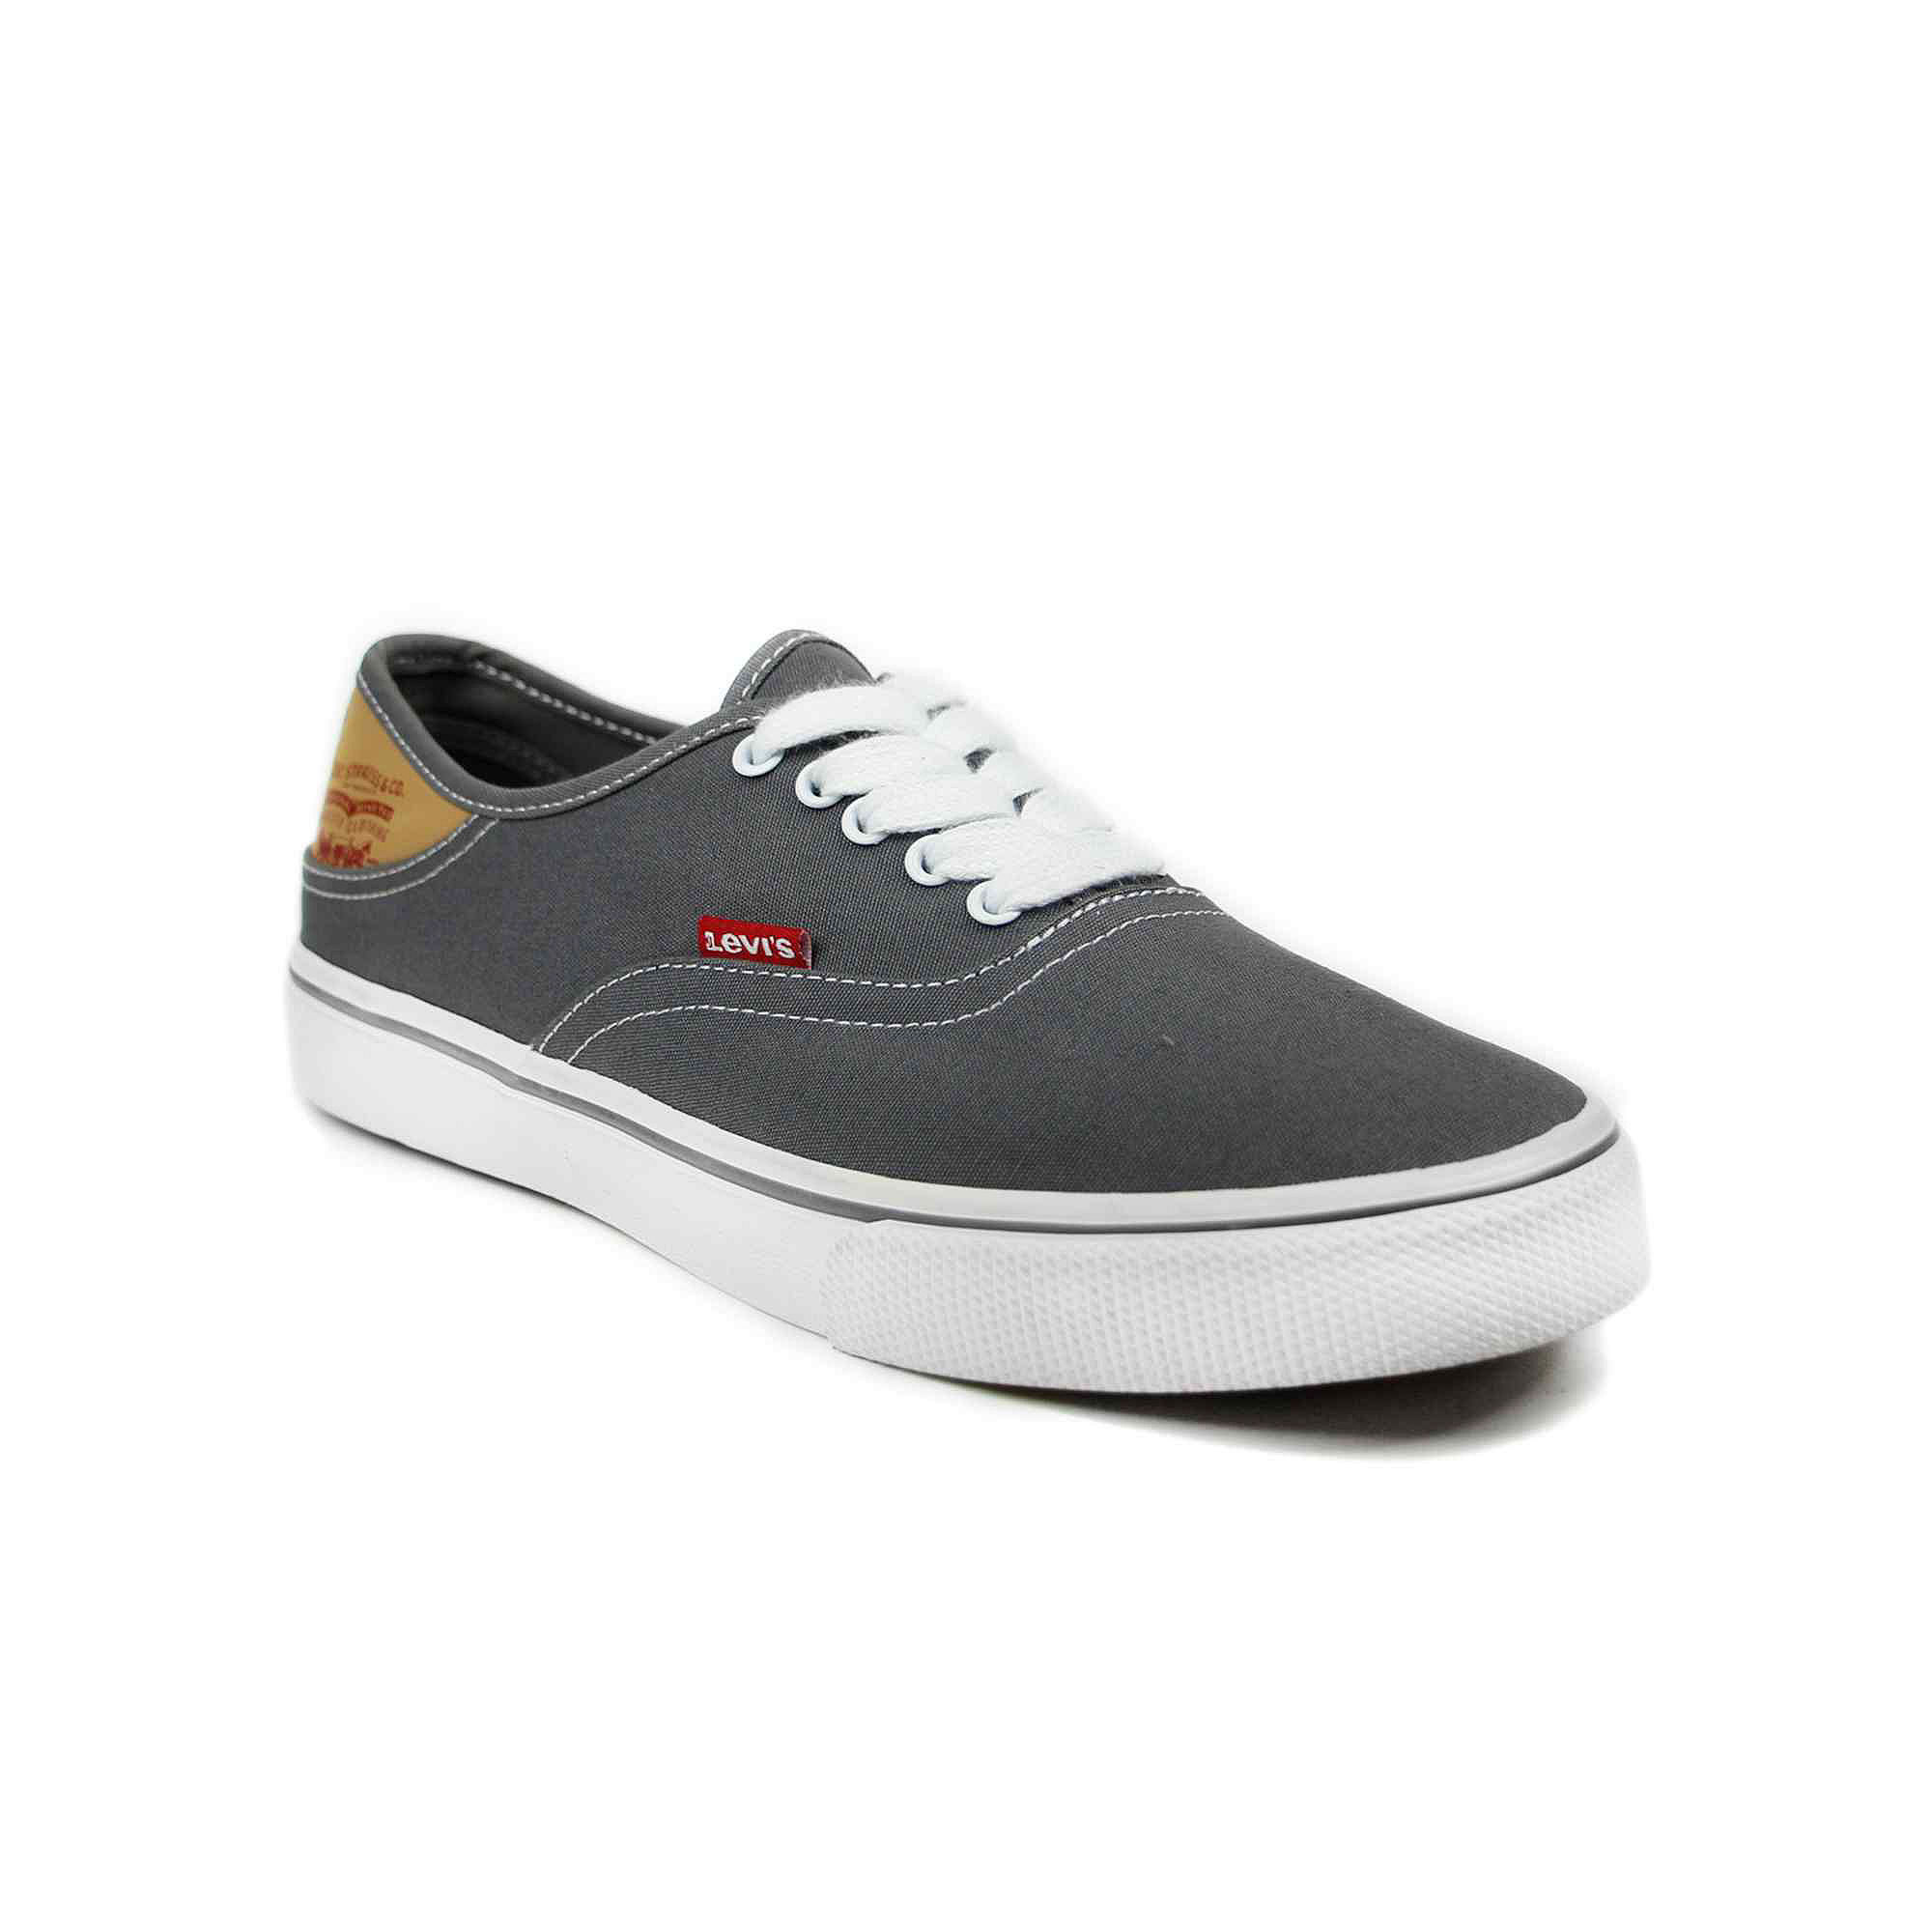 UPC 887326867643 product image for Levis Jordy Buck Mens Sneakers | upcitemdb.com